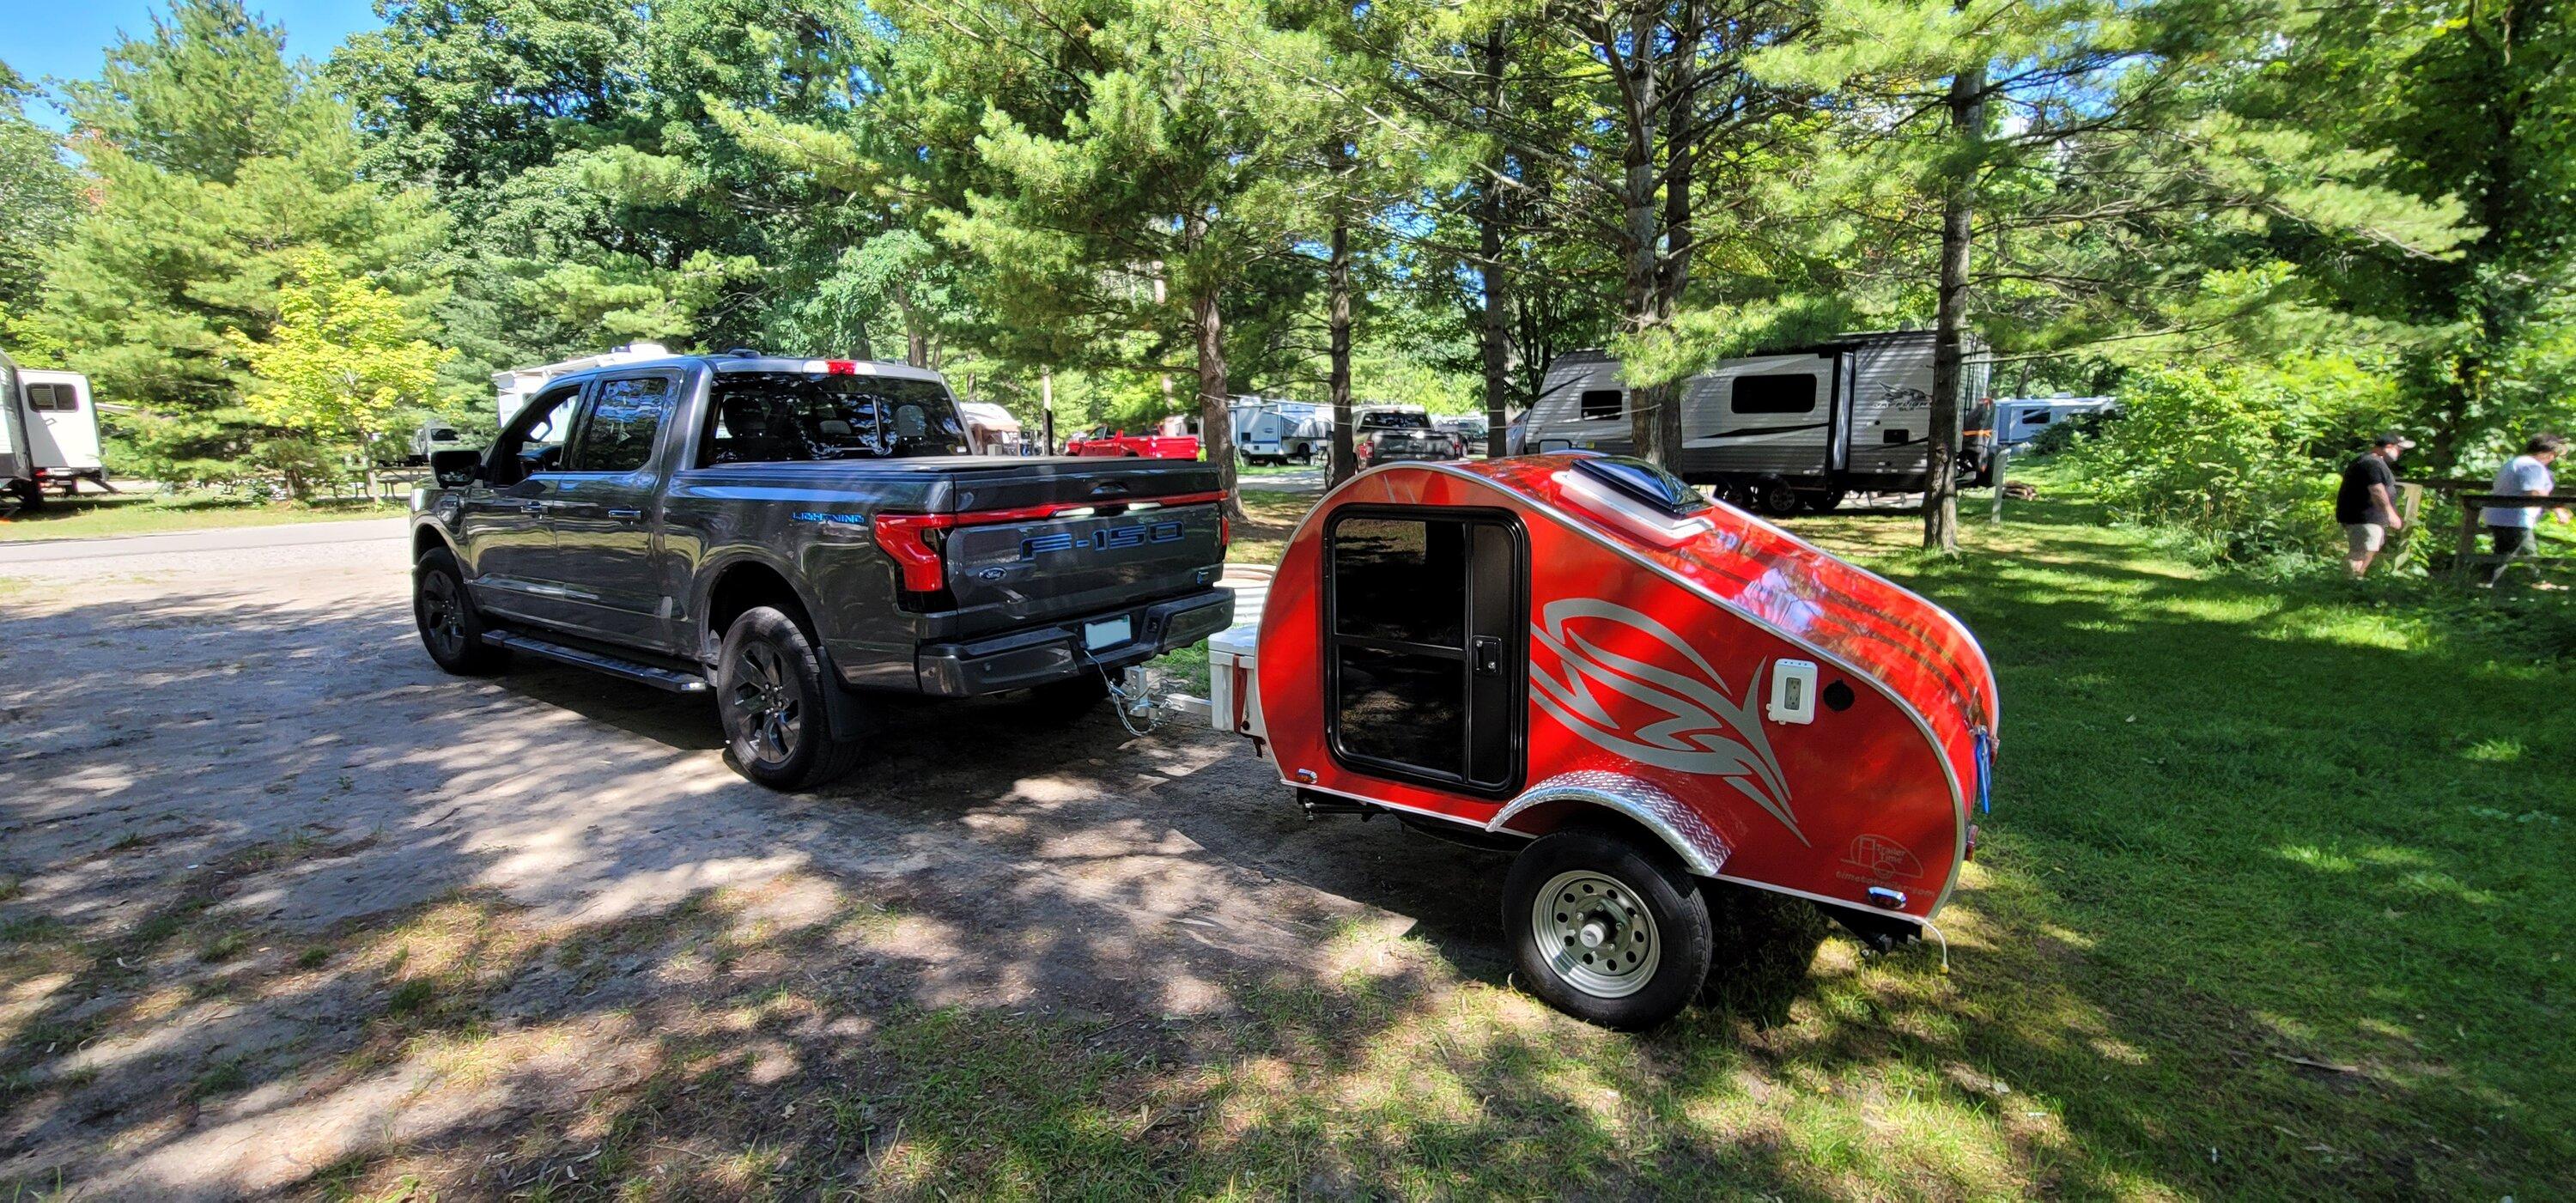 Ford F-150 Lightning Went camping with a tiny trailer 20230730_113159